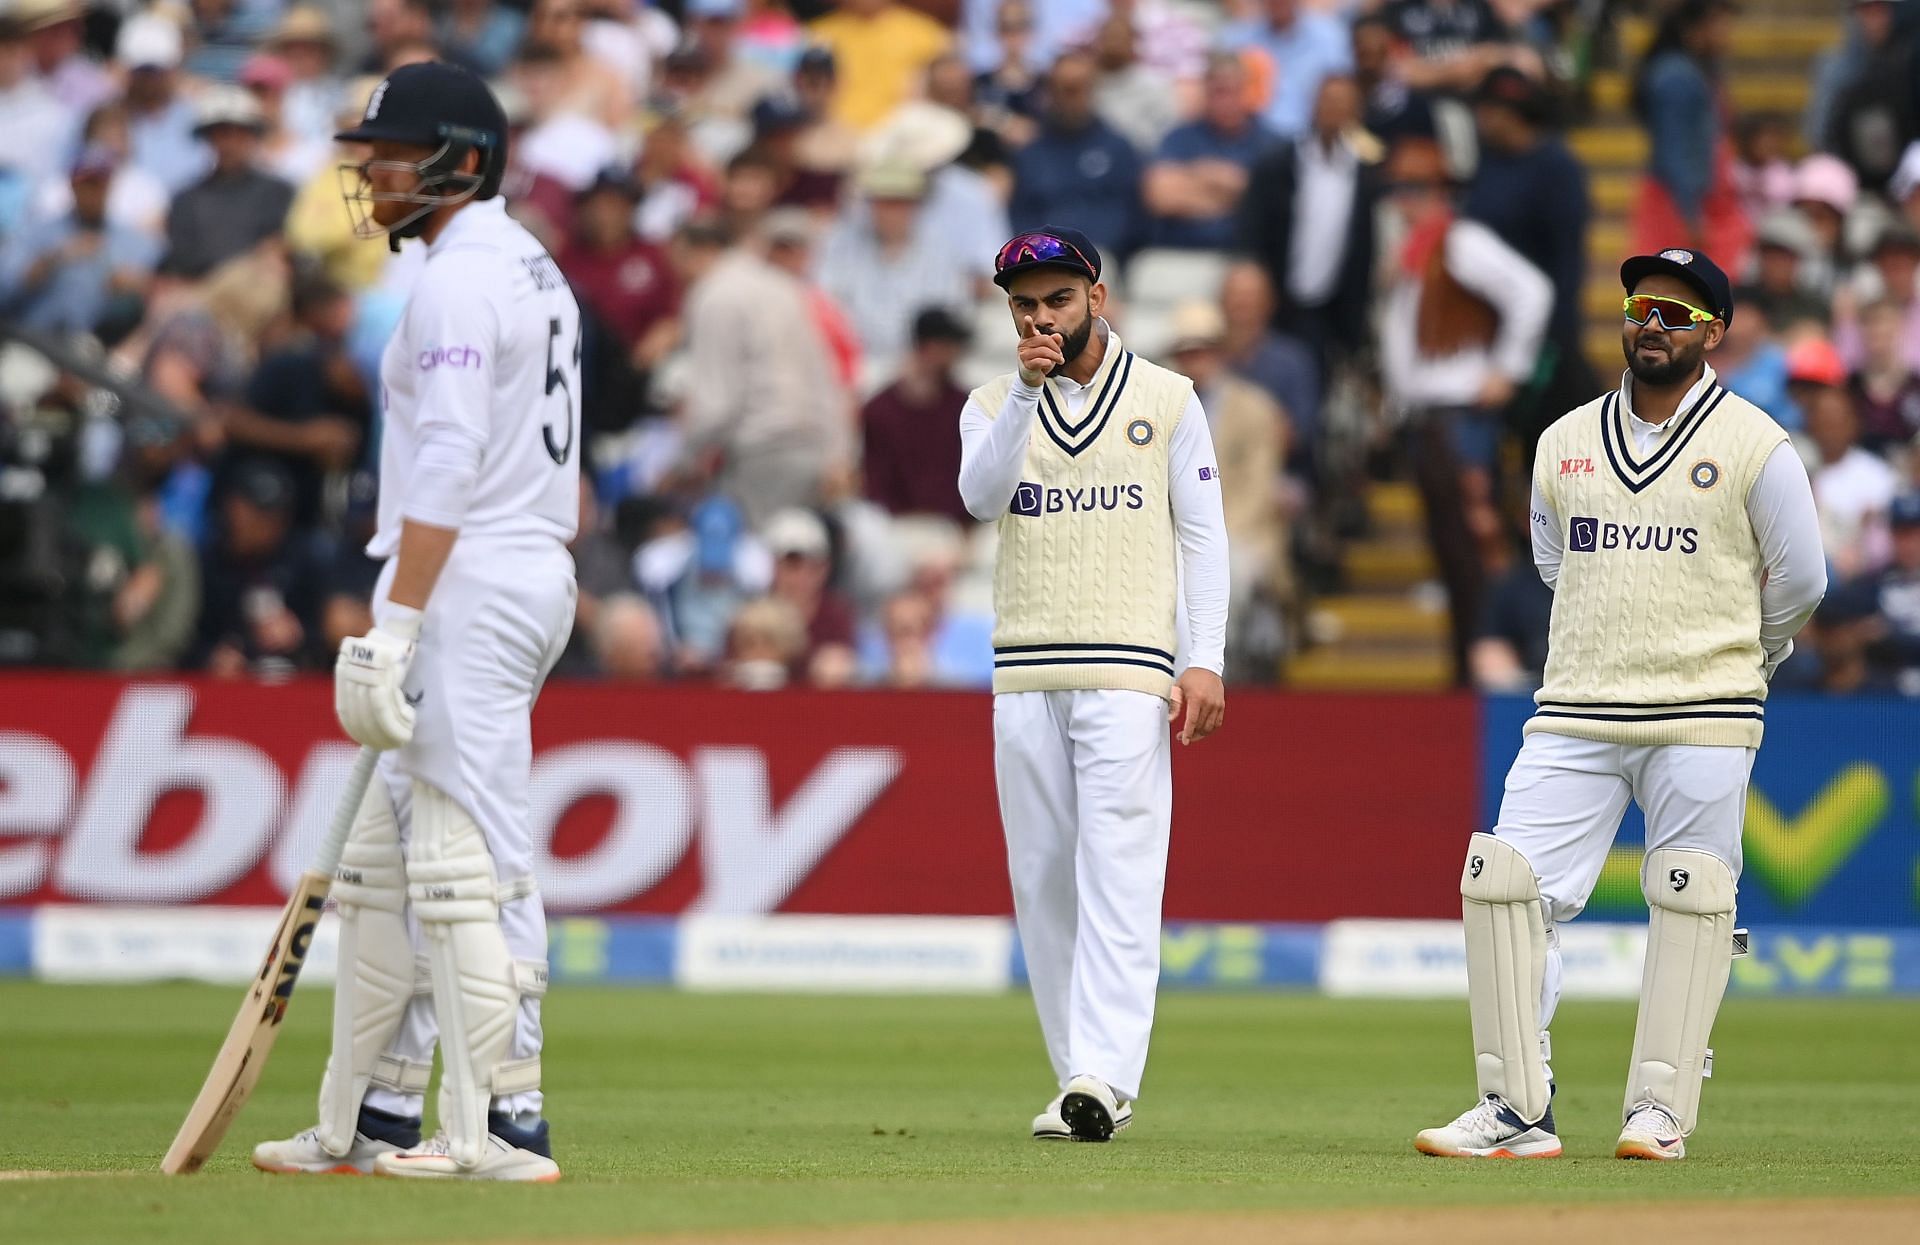 Virat Kohli exchanged some words with Jonny Bairstow during the rescheduled Test in Birmingham. (Pic: Getty Images)